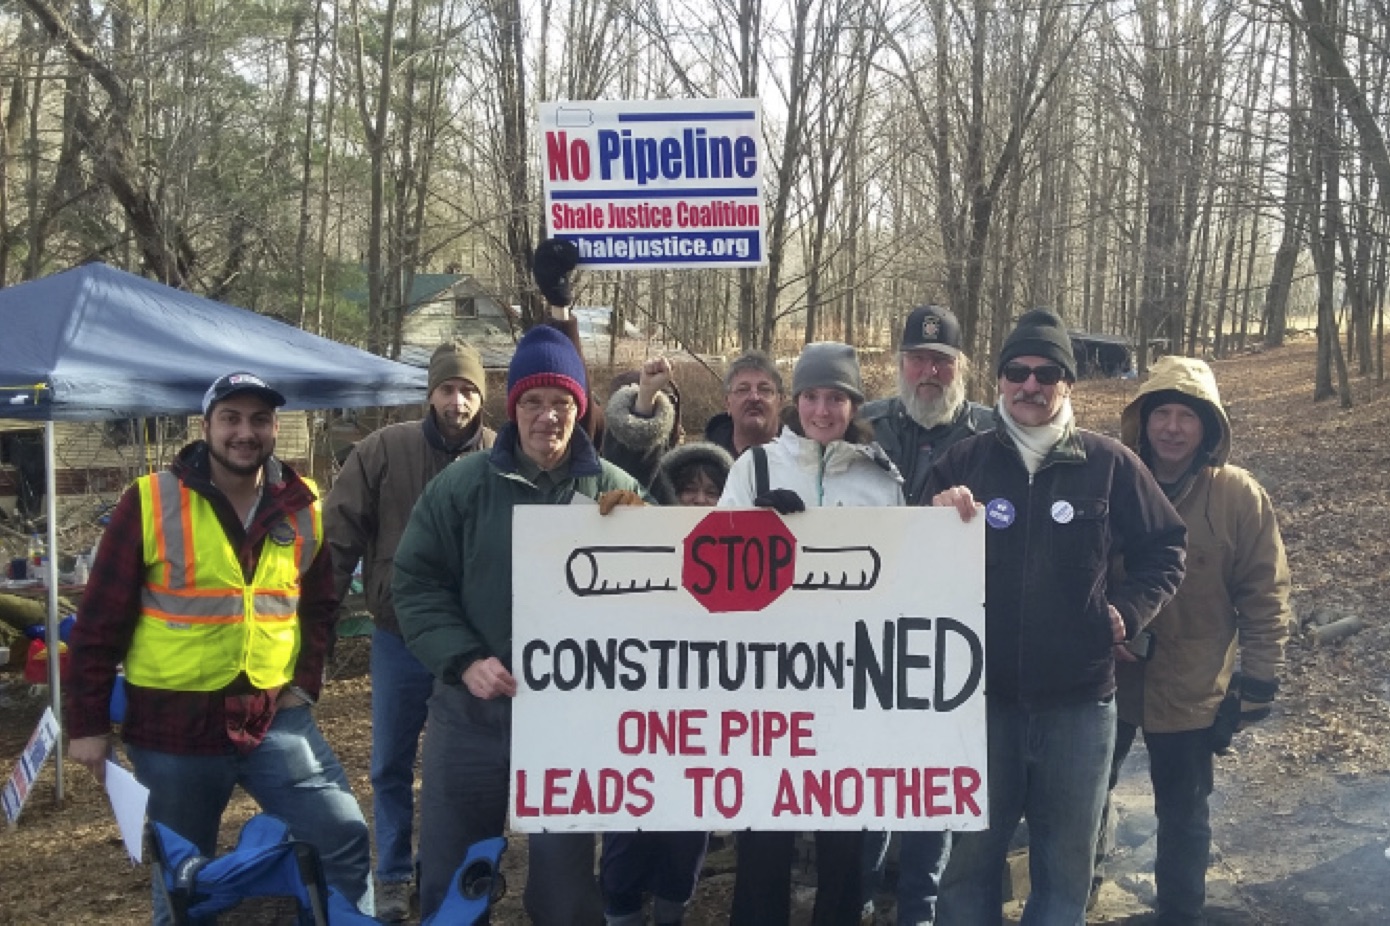 Activists protesting a pipepine in Pennsylvania.